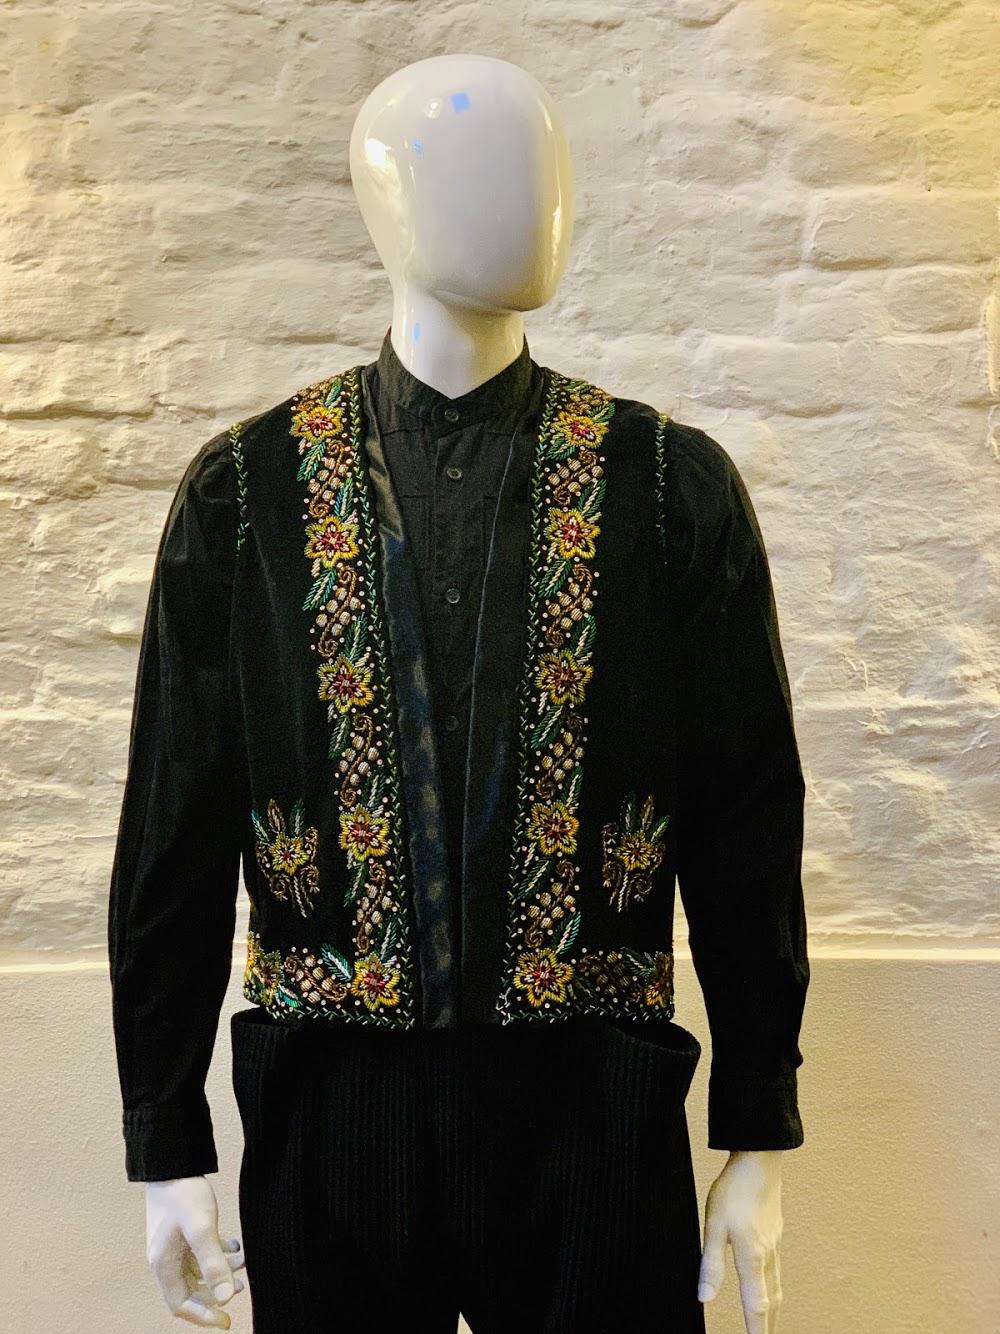 Hungarian Vintage 60s Elaborate Embroided Waistcoat made in Hungary from velvet.